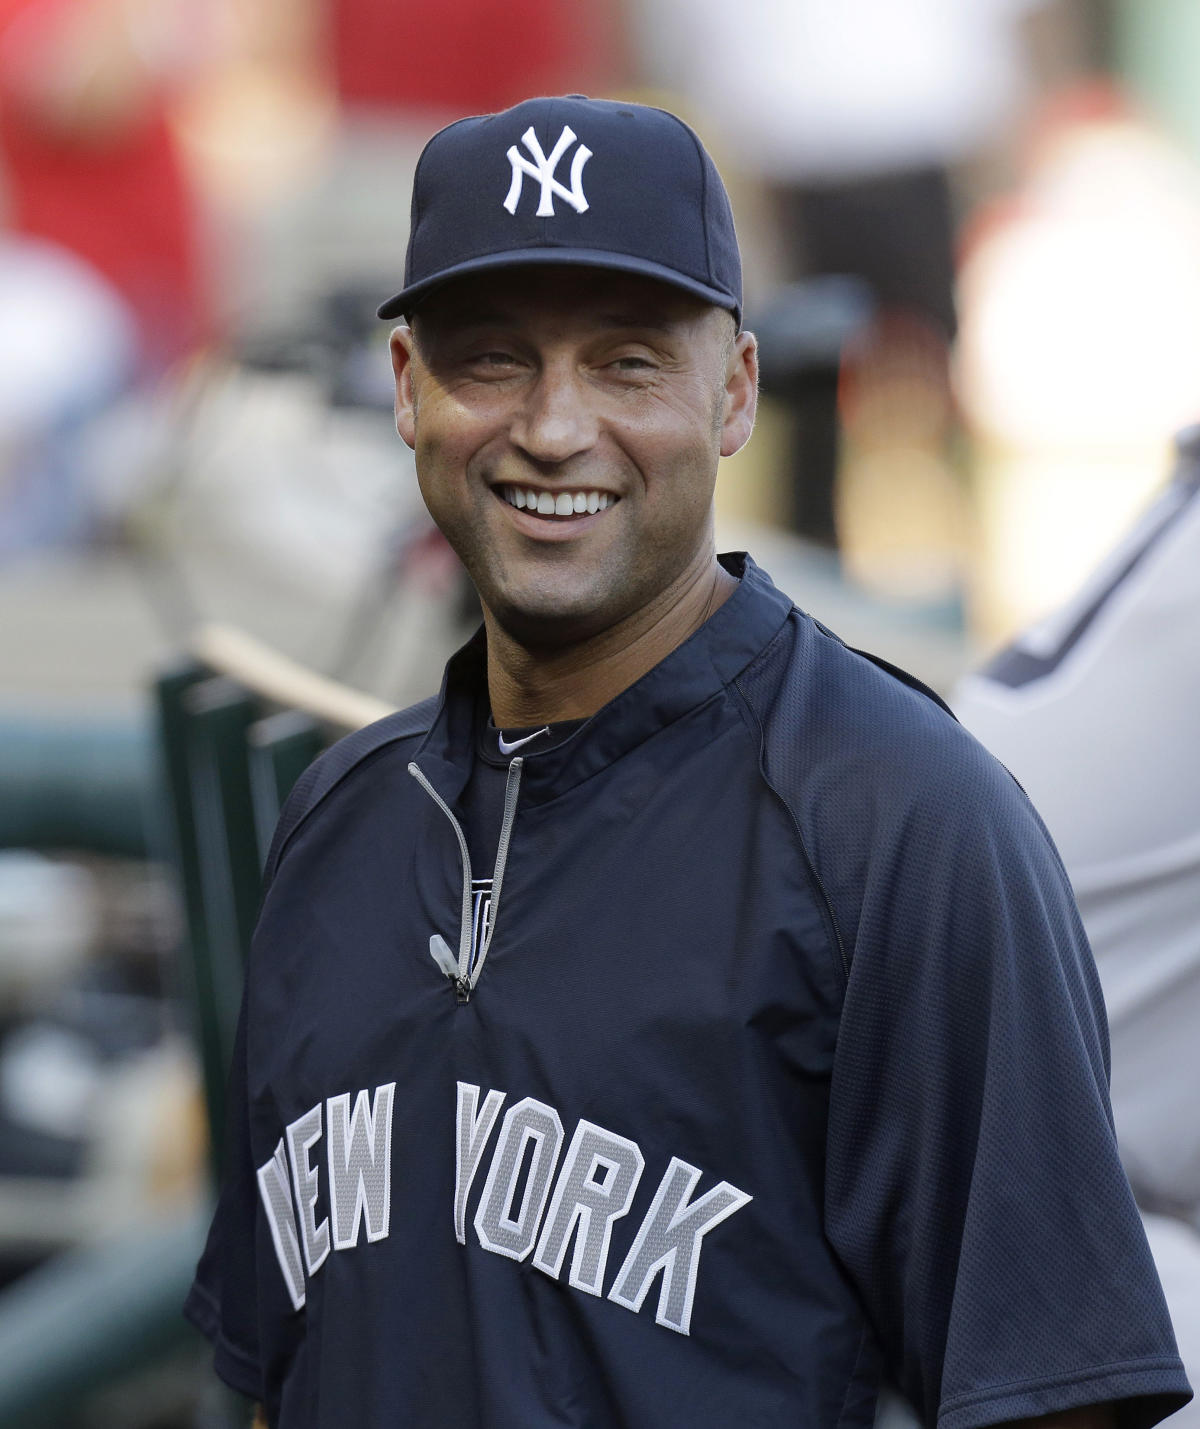 Jeter Participates In First Full-Squad Workout: 'It Felt Good